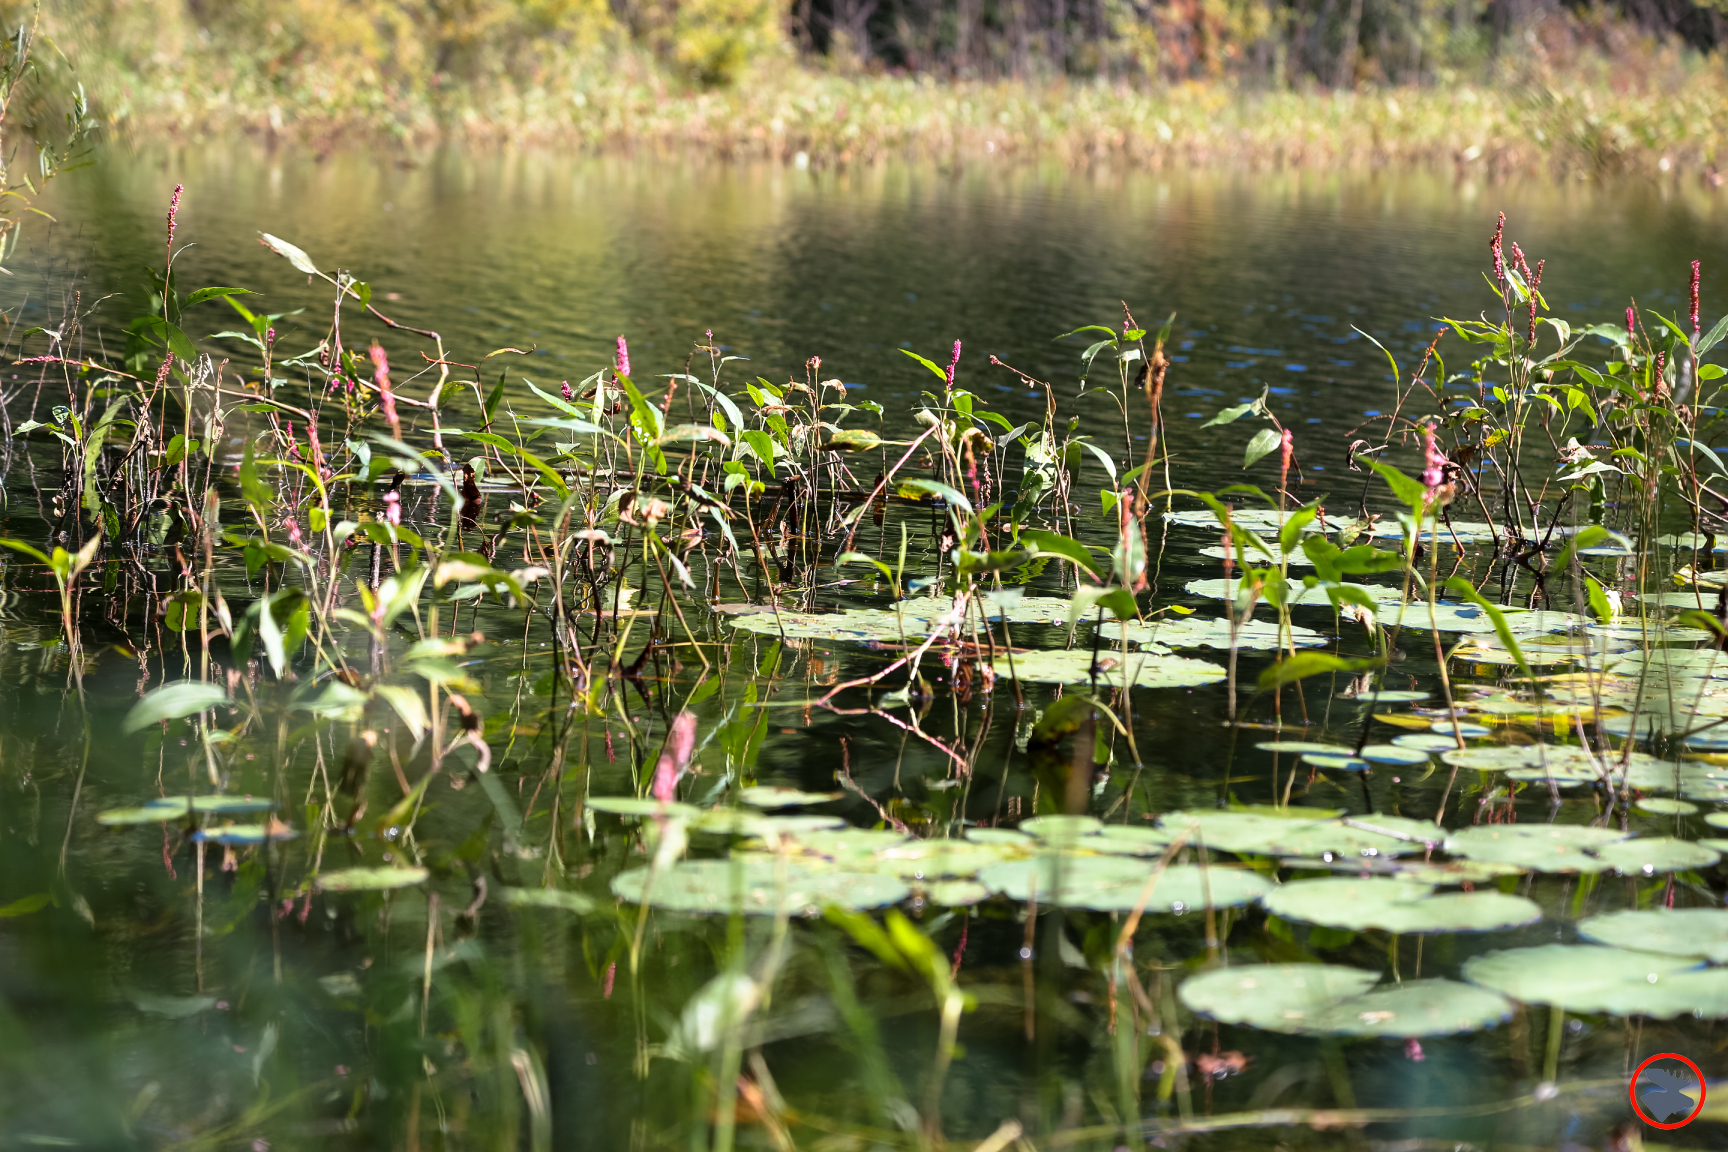 BMP-Post_Expedition-Log_Loyhead-Canoe-Route_Lillypads_9-10-17.jpg